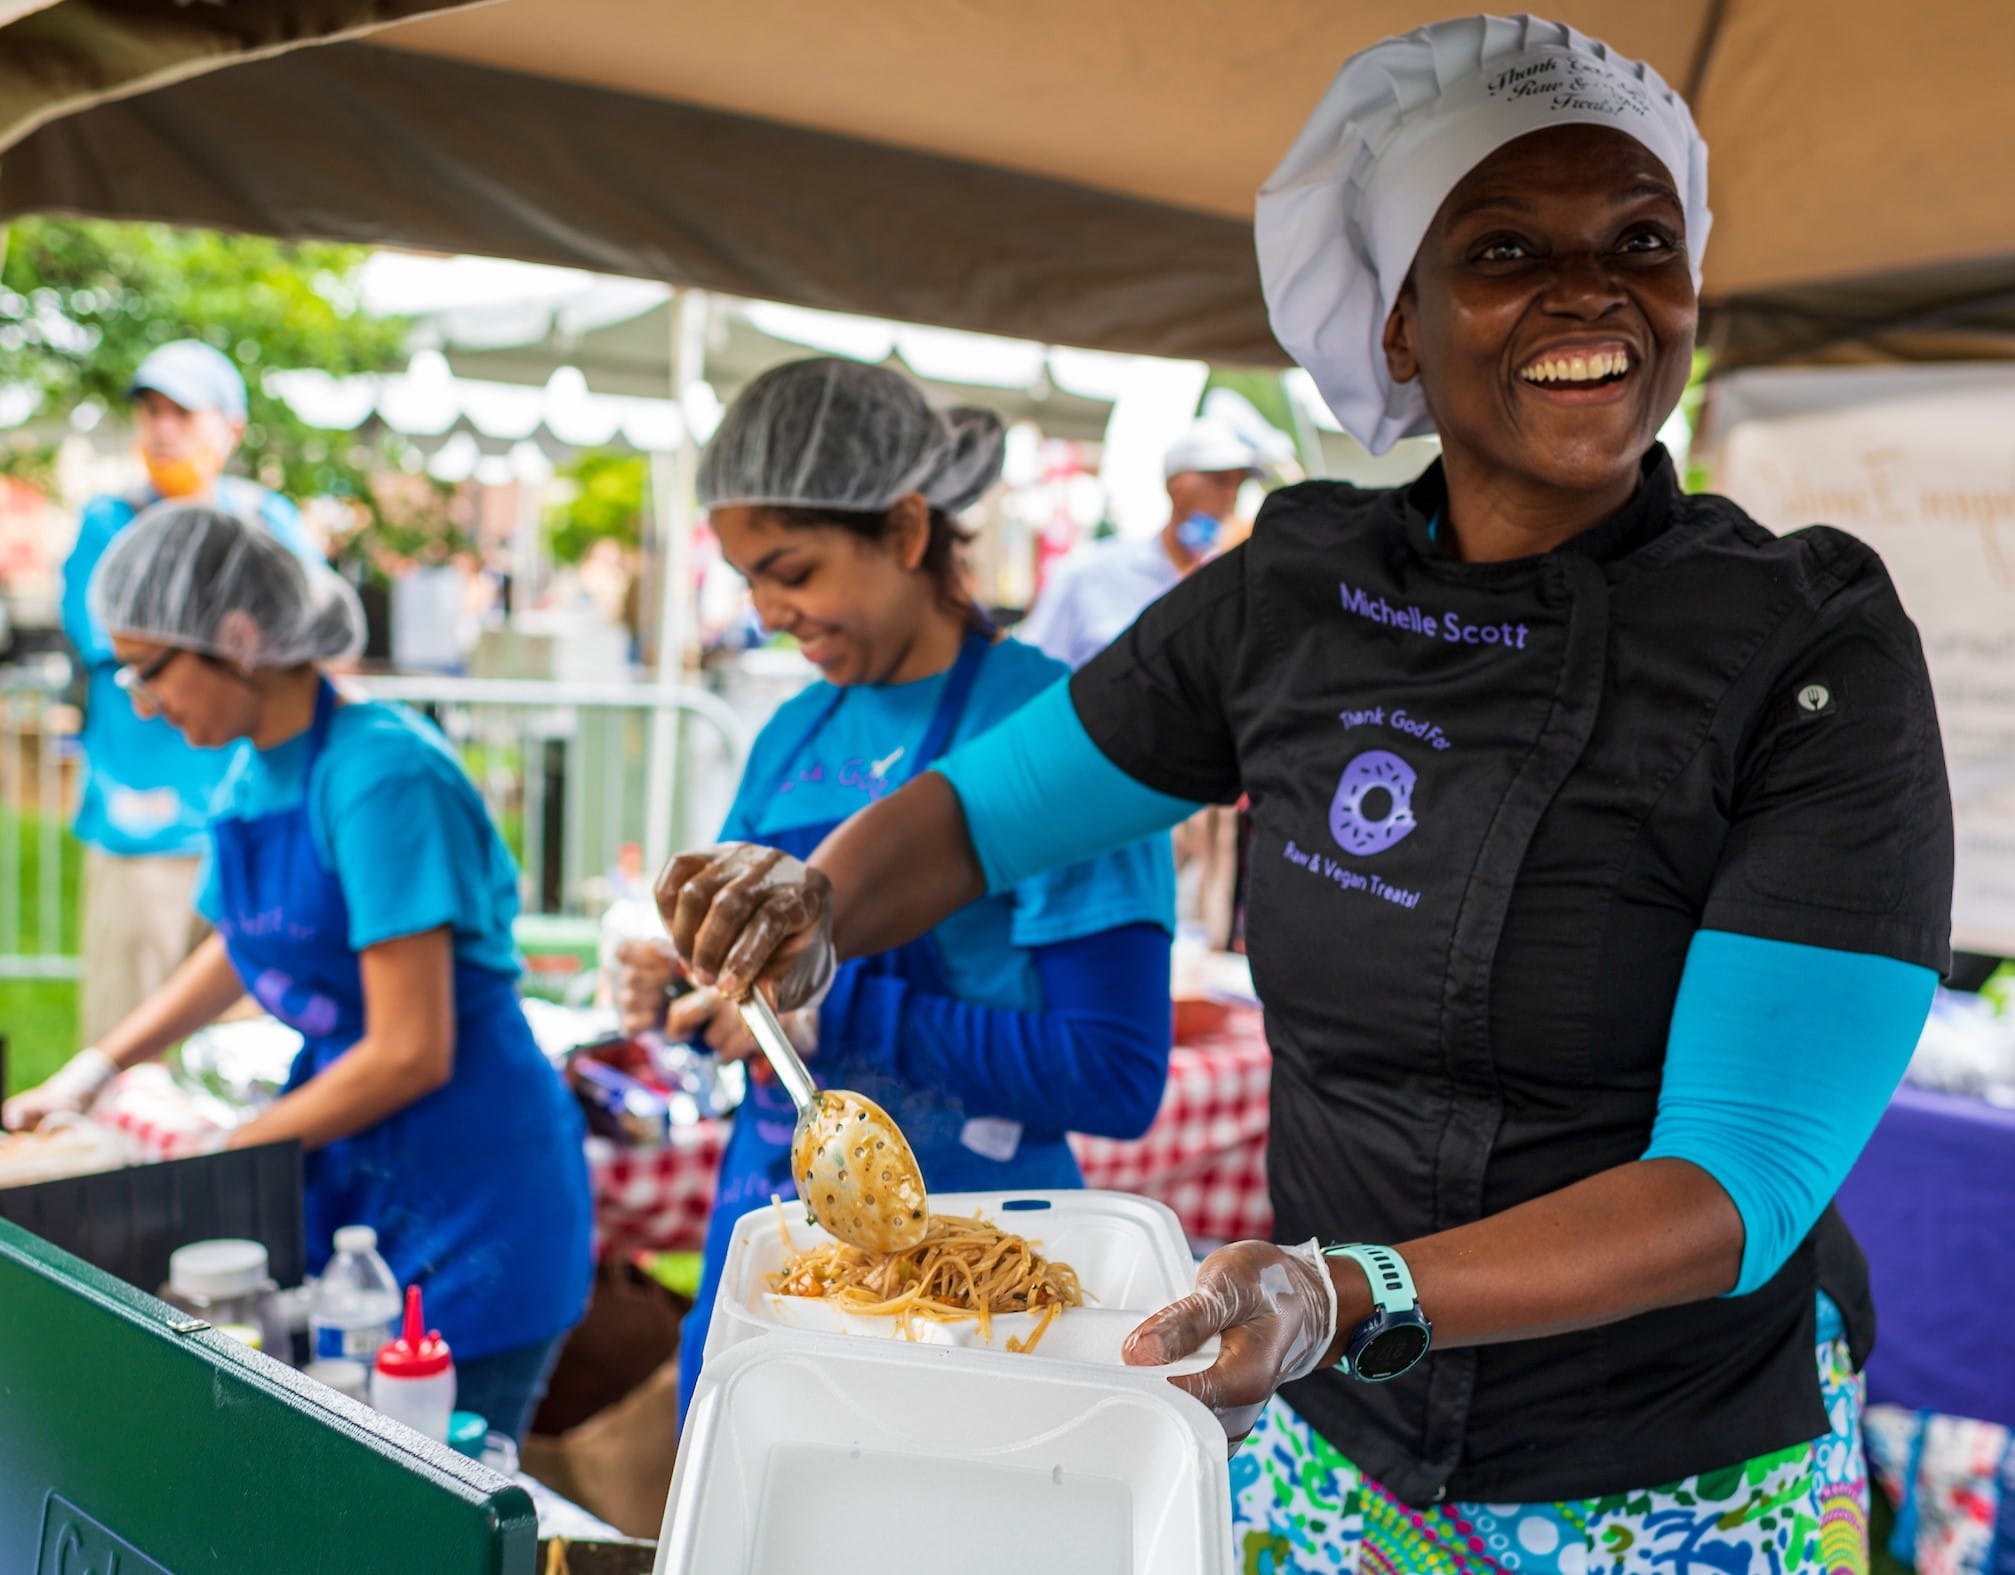 Still image of a person serving food at the festival